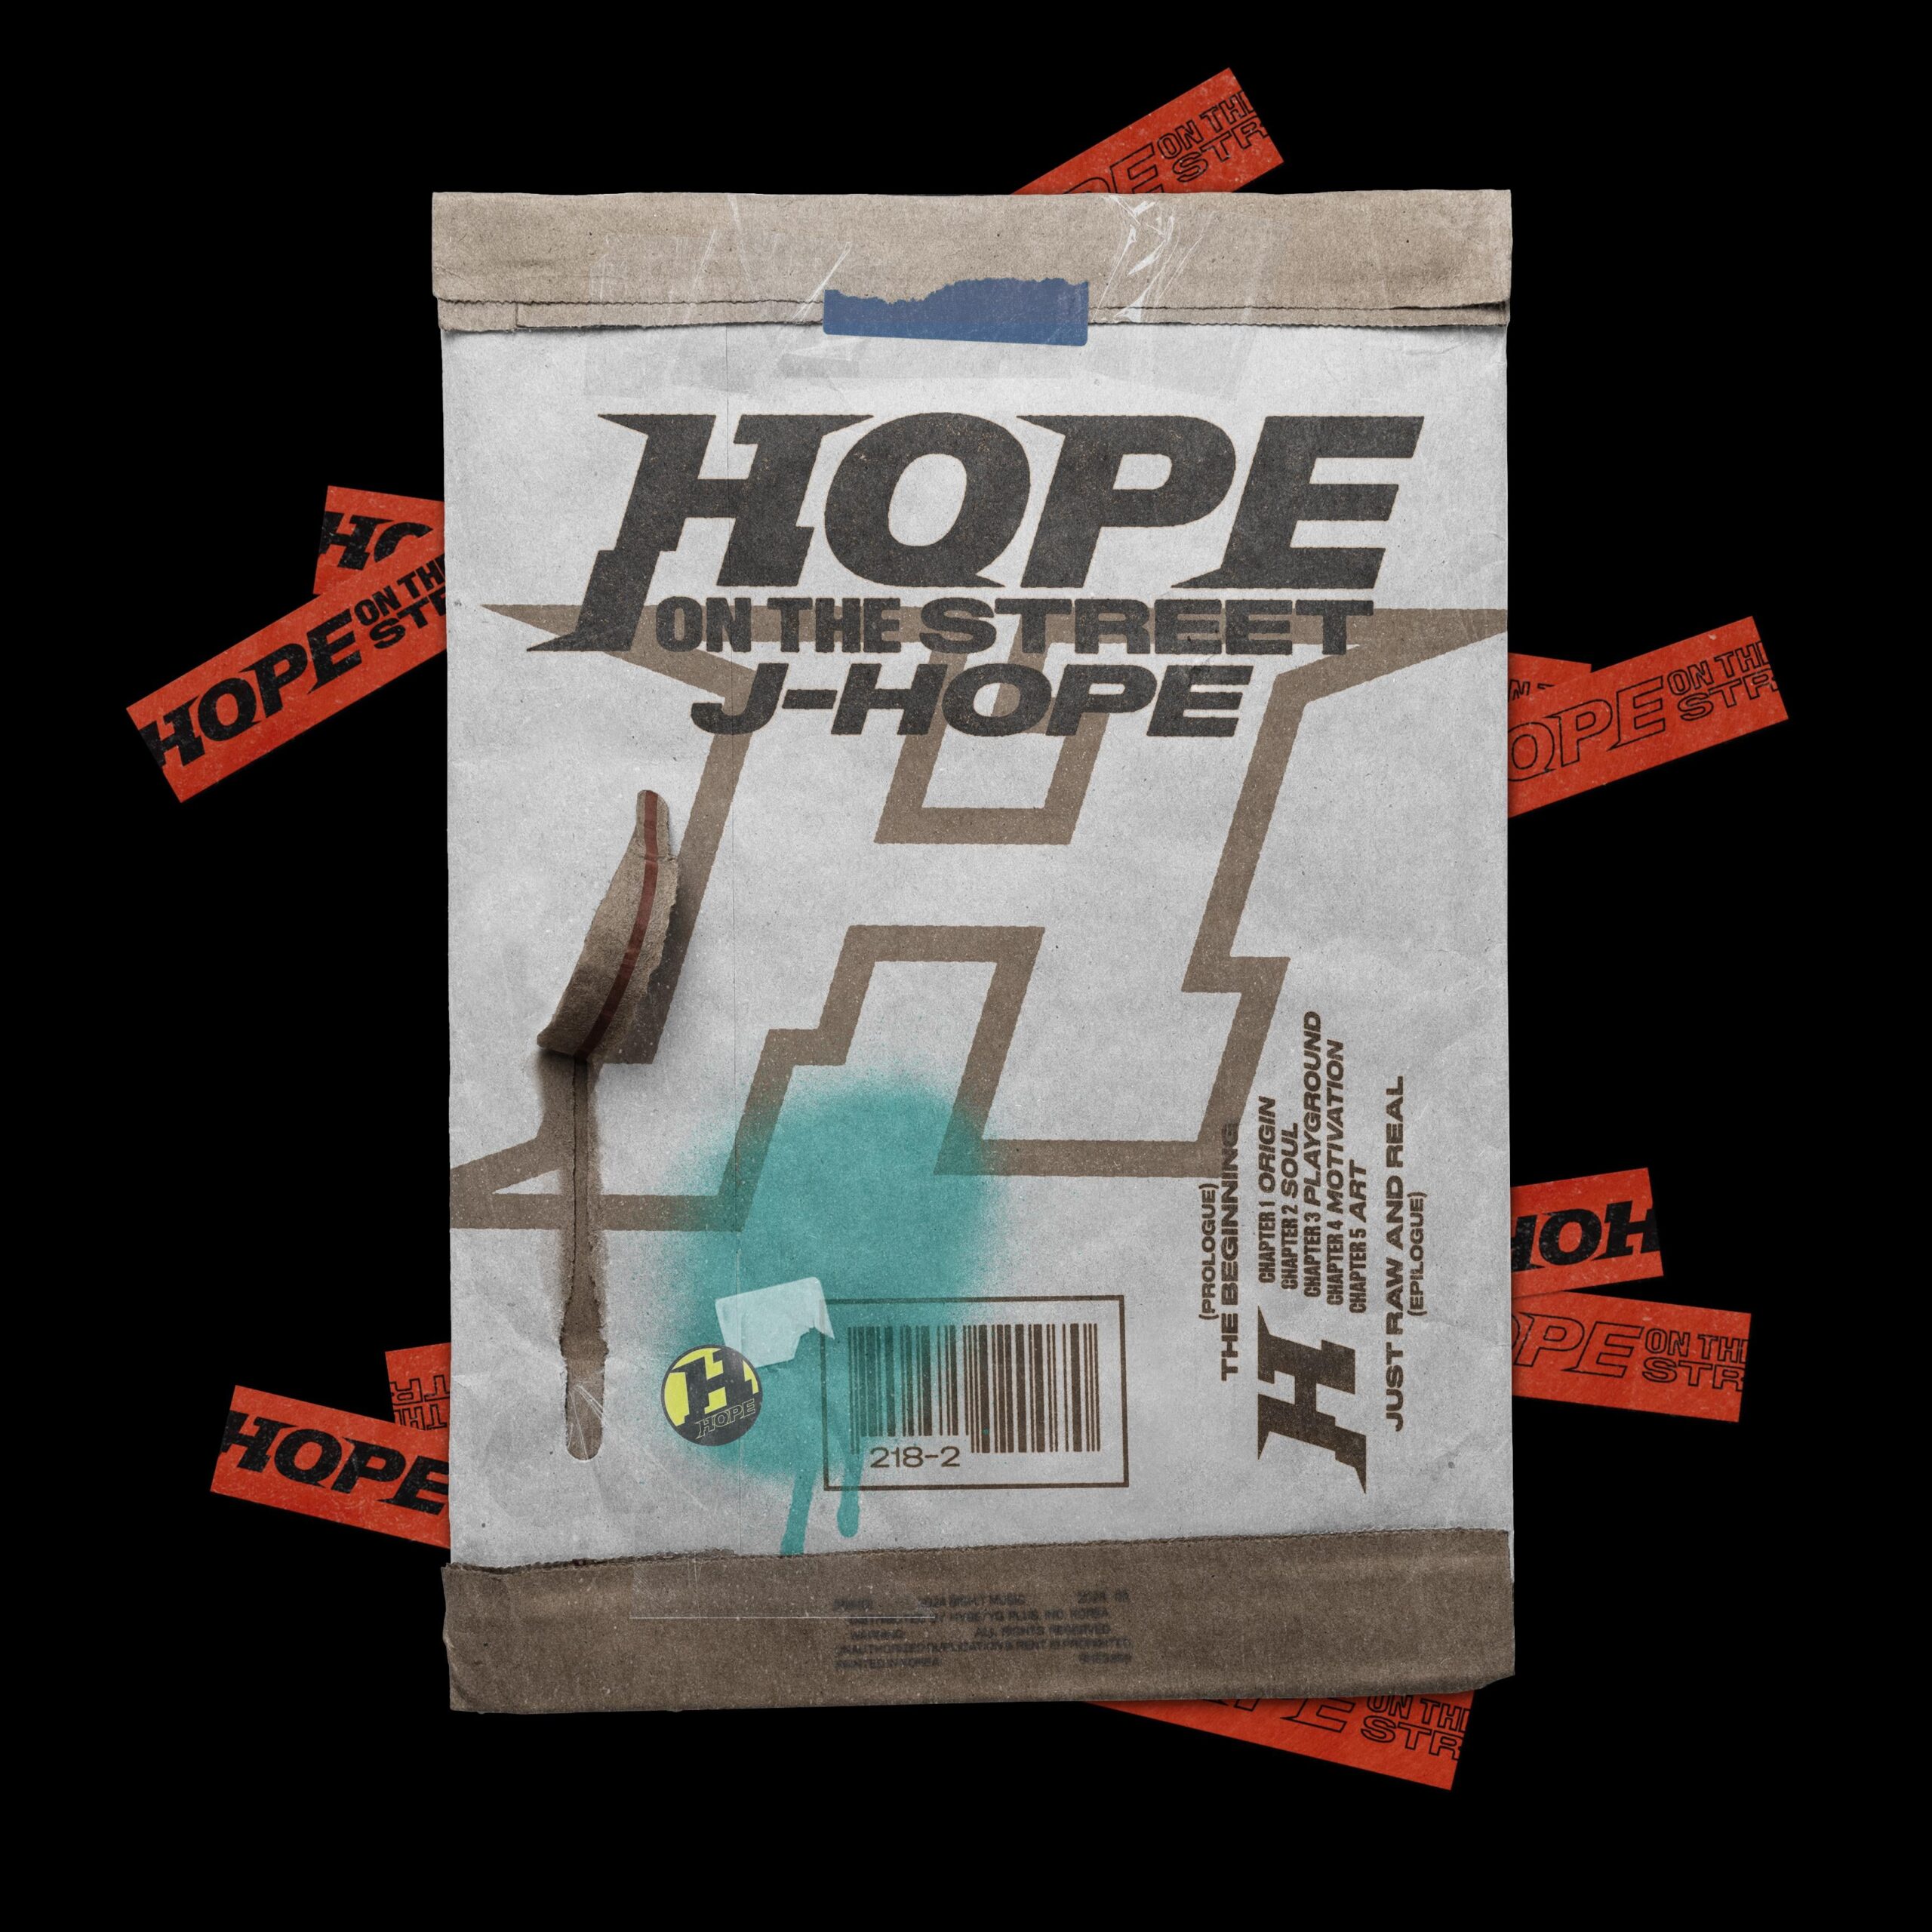 [Notice] j-hope special album ‘HOPE ON THE STREET VOL.1’ release announcement (+ENG/JPN/CHN) - 190224